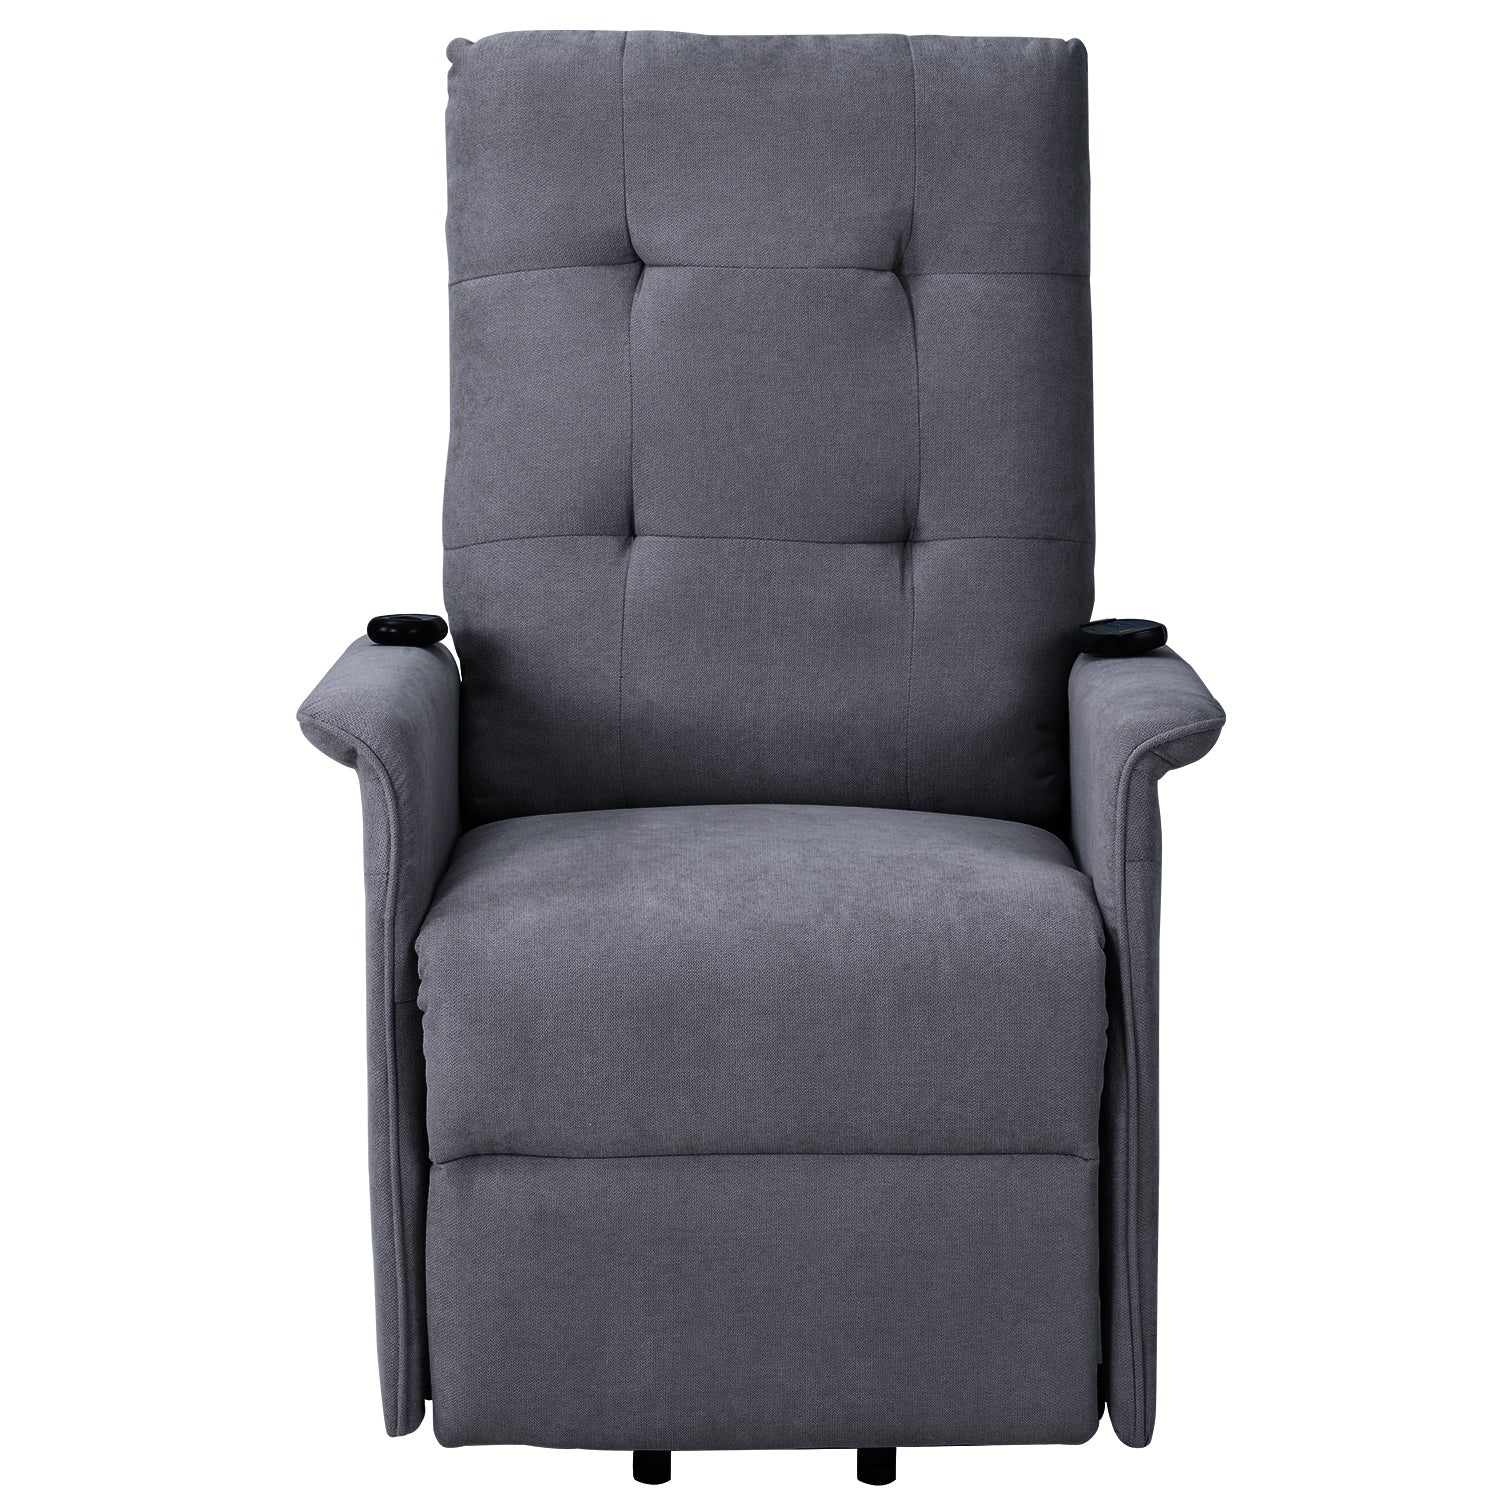 Power Lift Chair Recliner with Adjustable Massage, Dark Gray seated front view